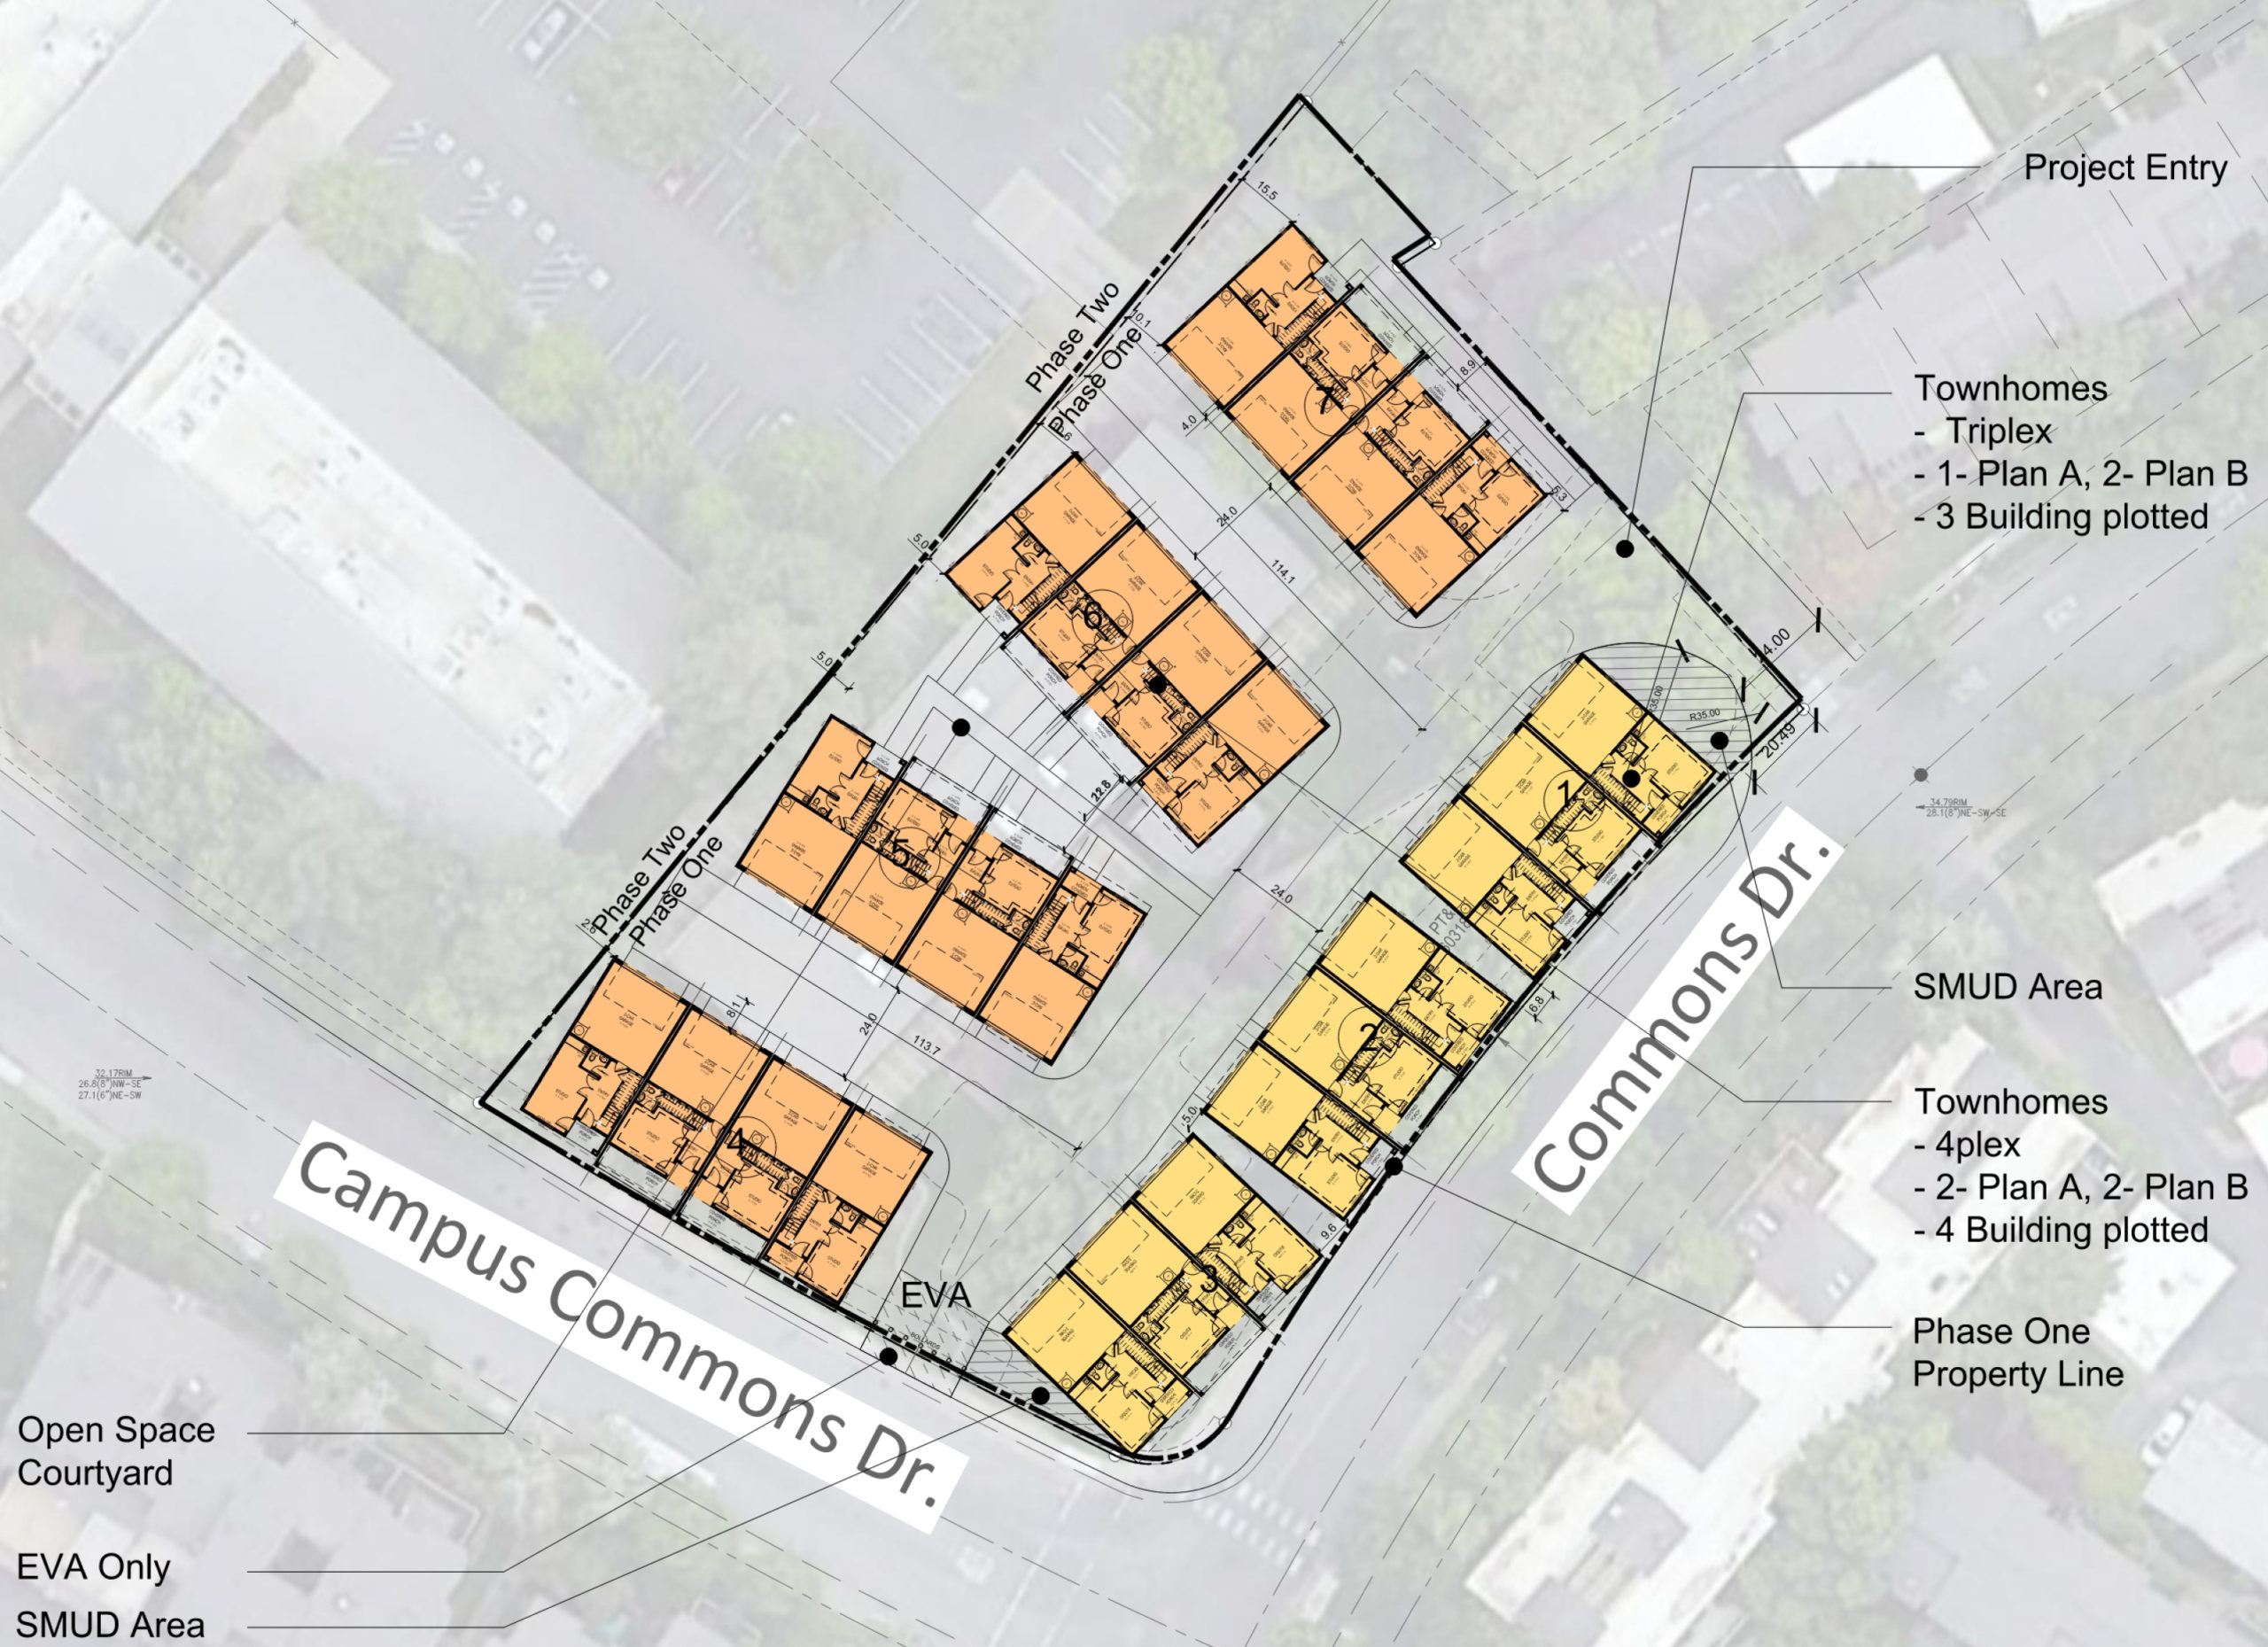 707 Commons Drive, site map by BSB Design